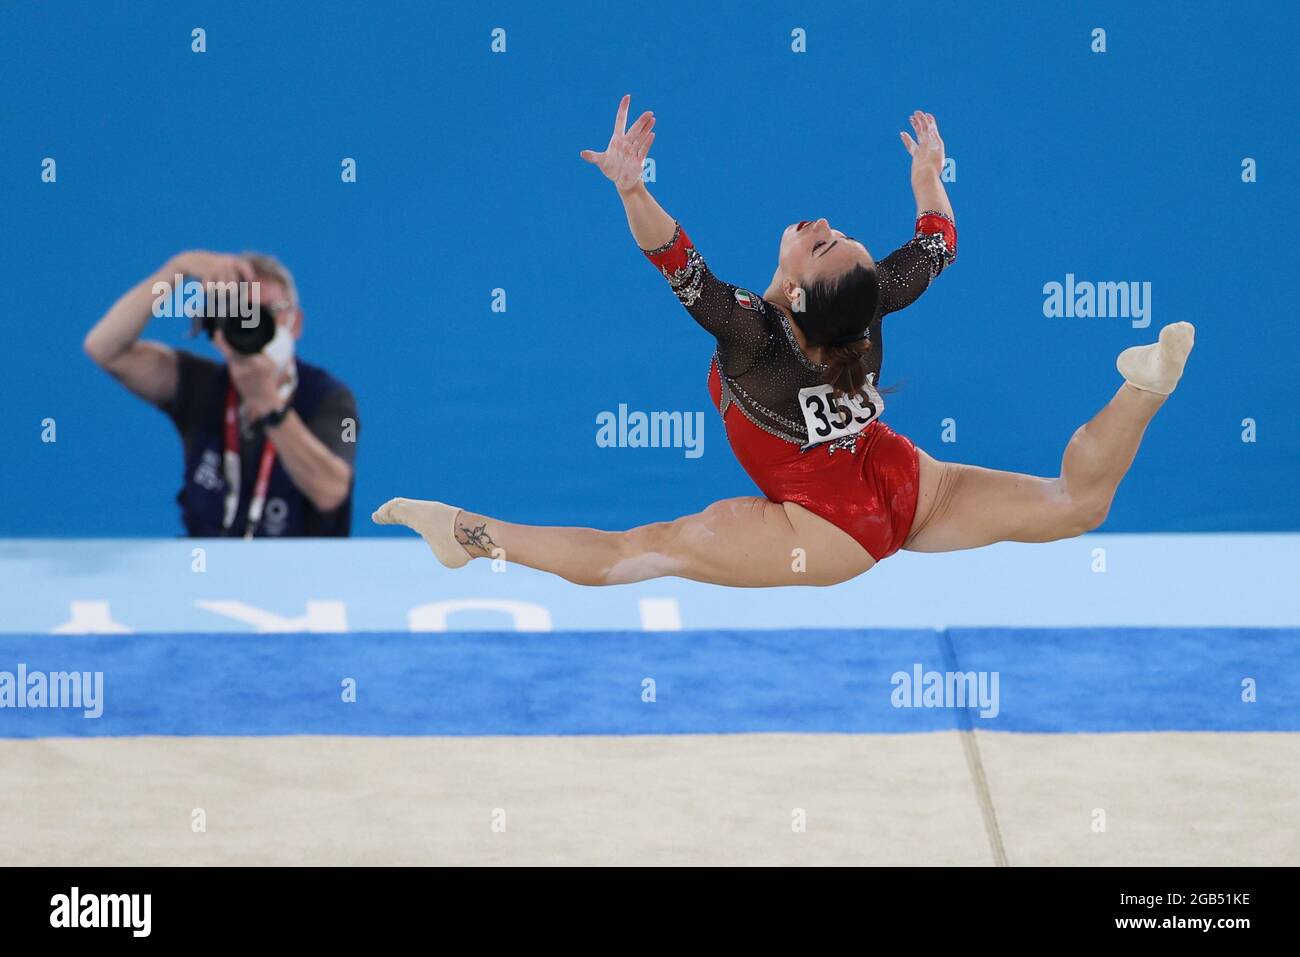 Tokyo, Japan. 2nd Aug, 2021. Vanessa Ferrari of Italy competes during the artistic gymnastics women's floor exercise final at the Tokyo 2020 Olympic Games in Tokyo, Japan, Aug. 2, 2021. Credit: Zheng Huansong/Xinhua/Alamy Live News Stock Photo